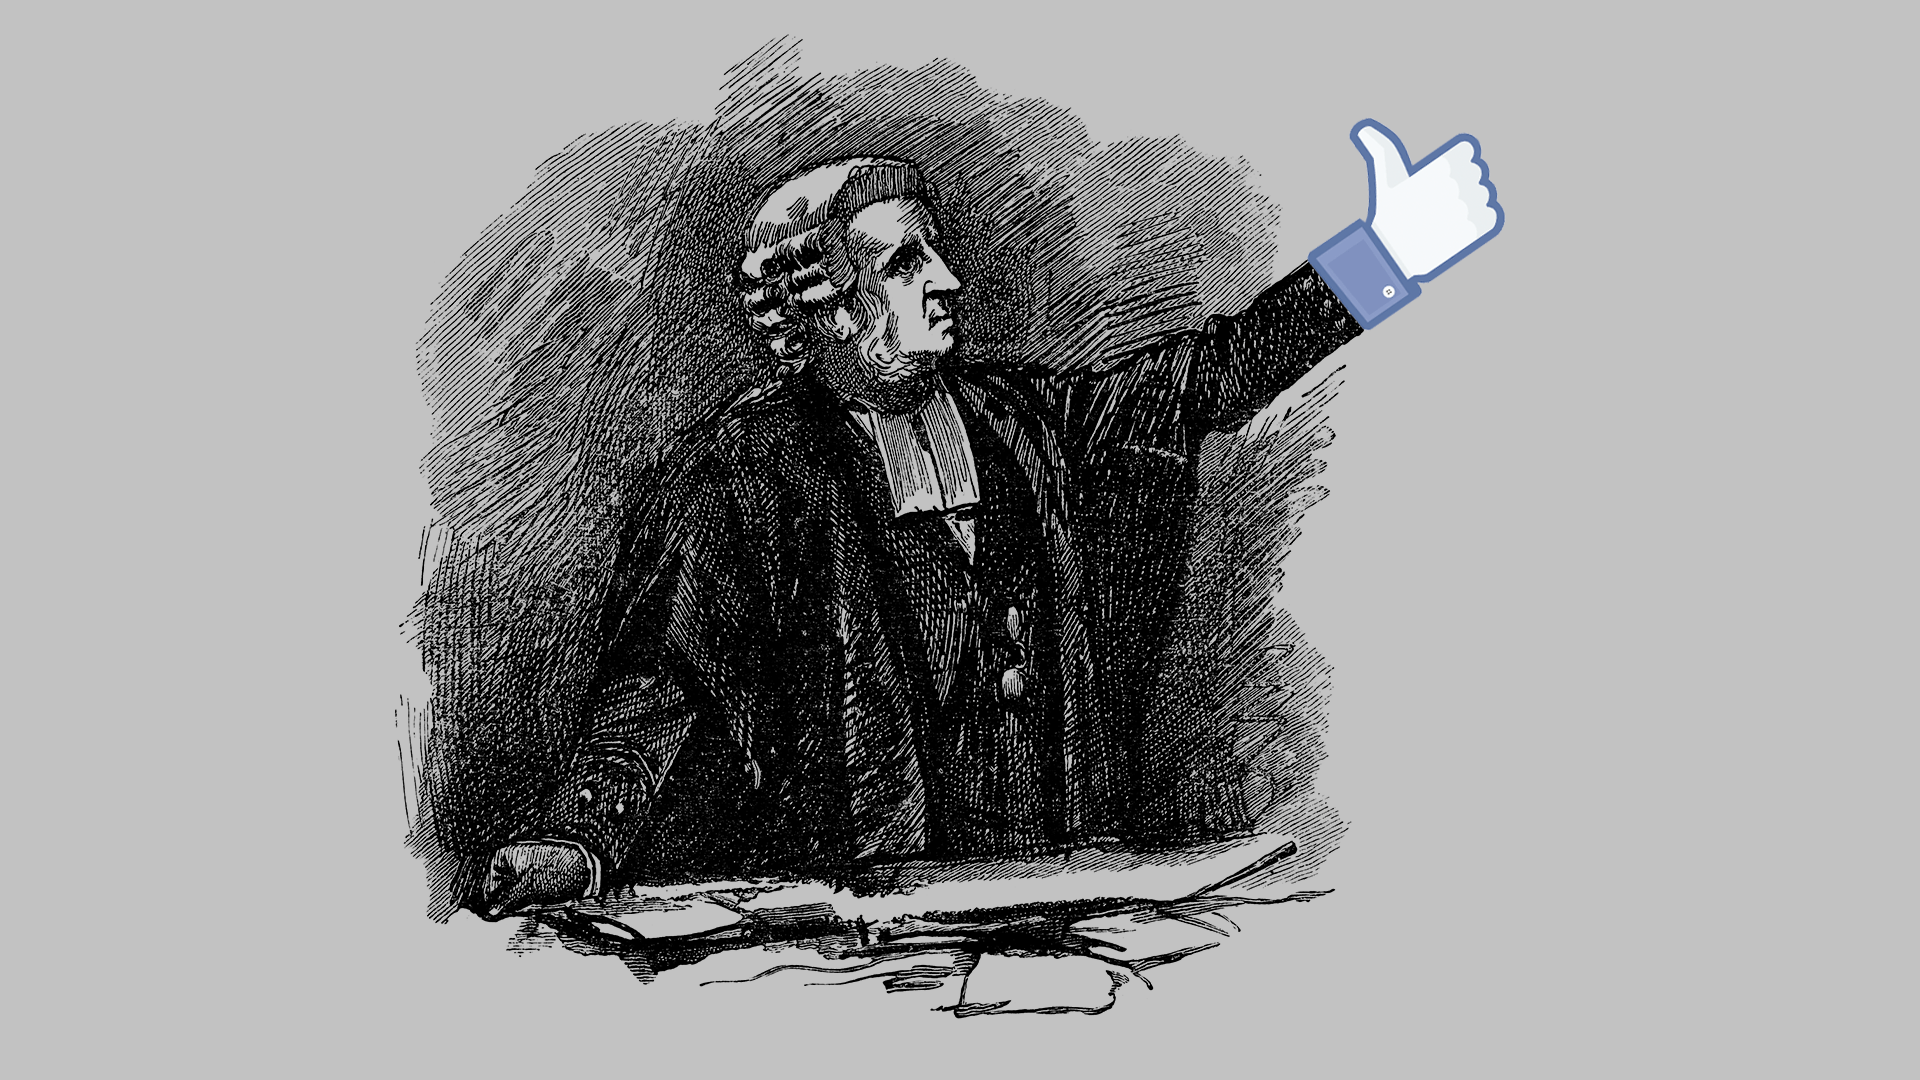 A black and white illustration of a founding father with a Facebook thumbs up icon as a hand